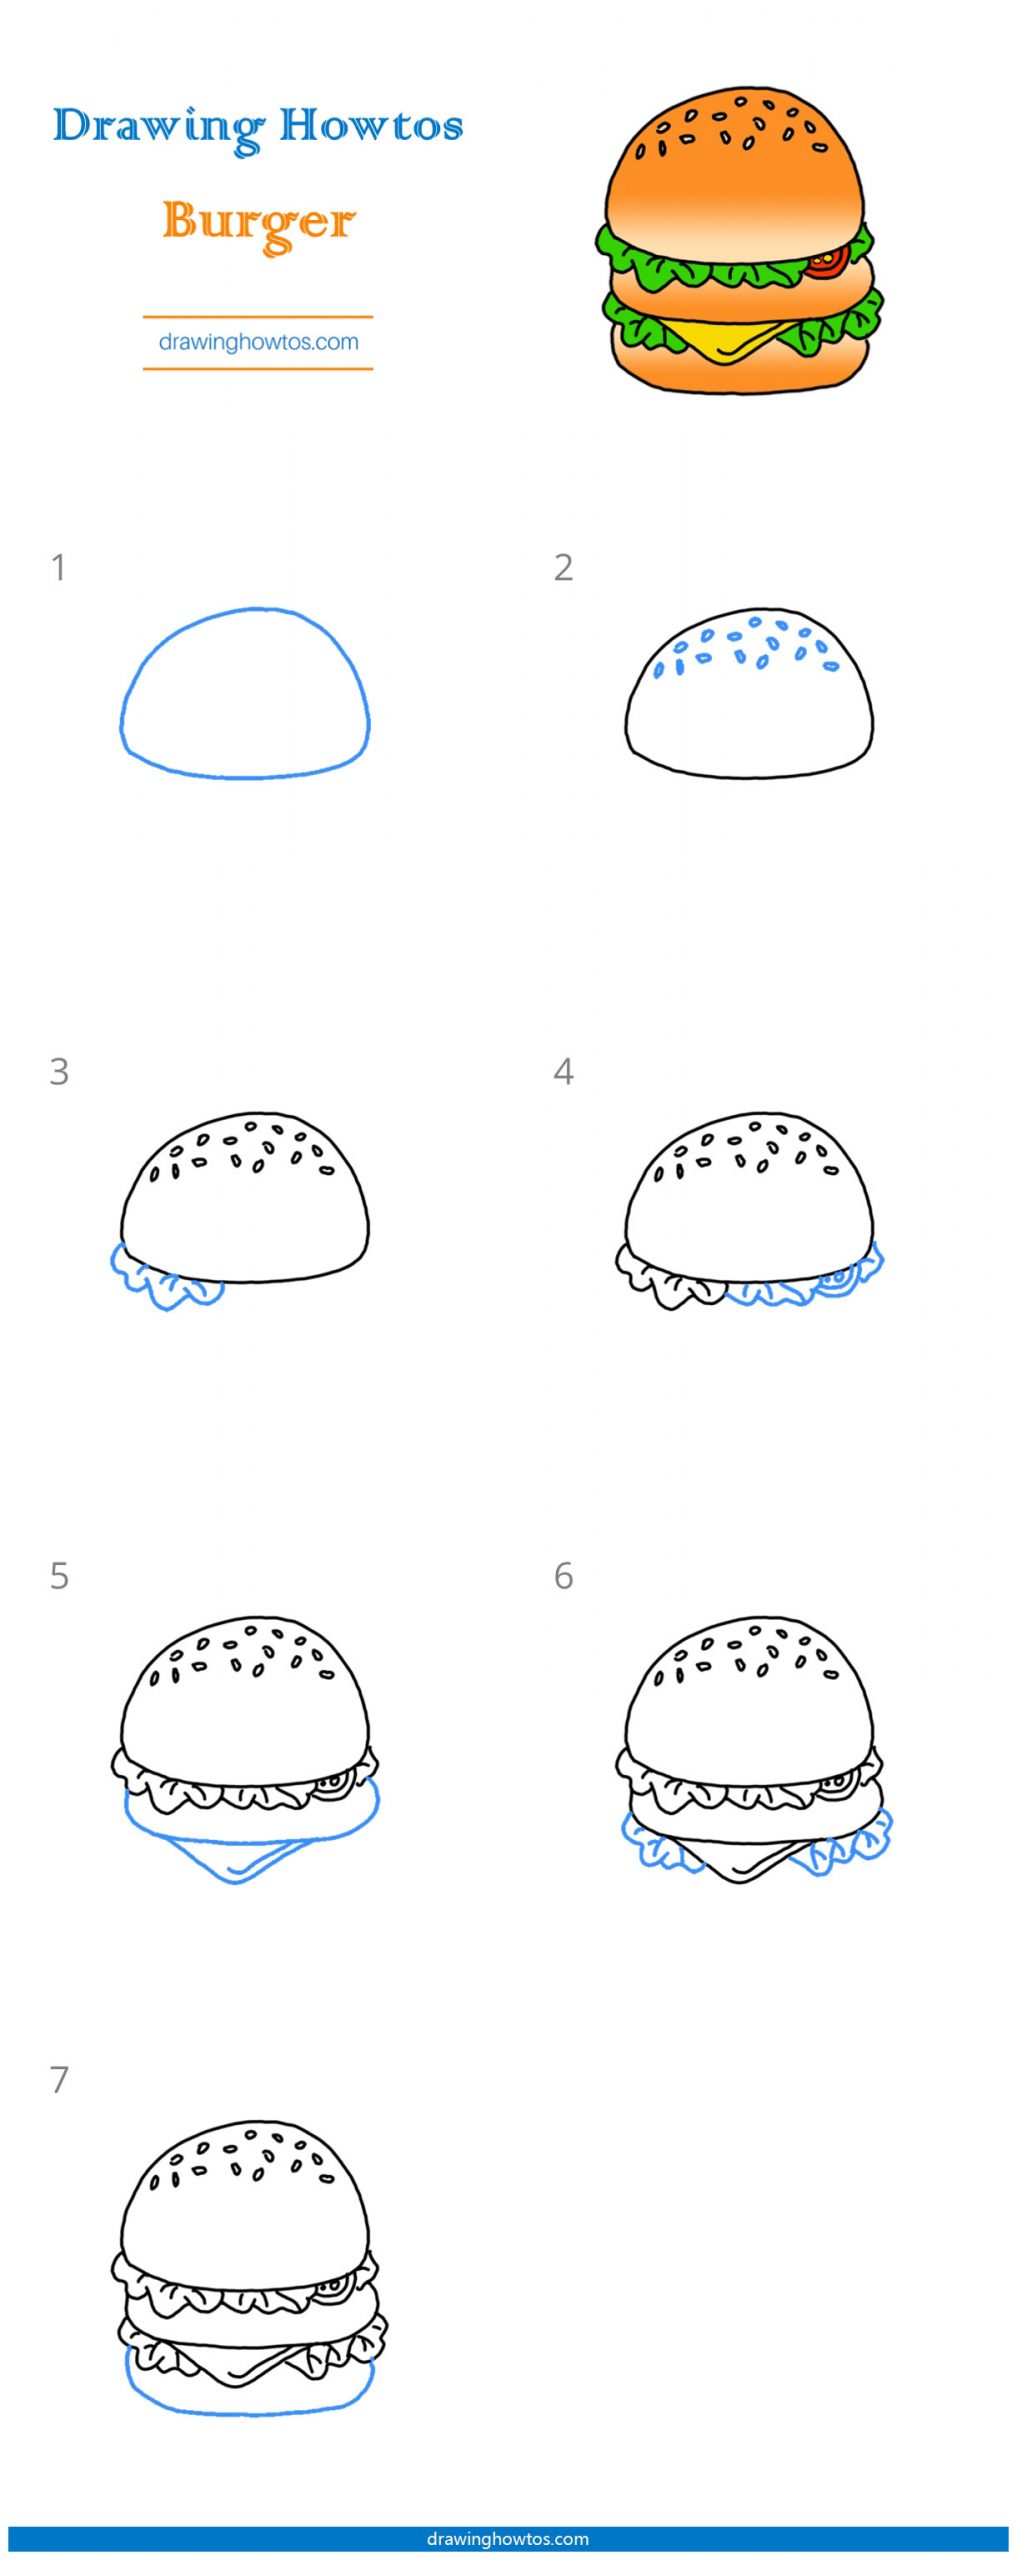 How to Draw a Burger Step by Step Easy Drawing Guides Drawing Howtos